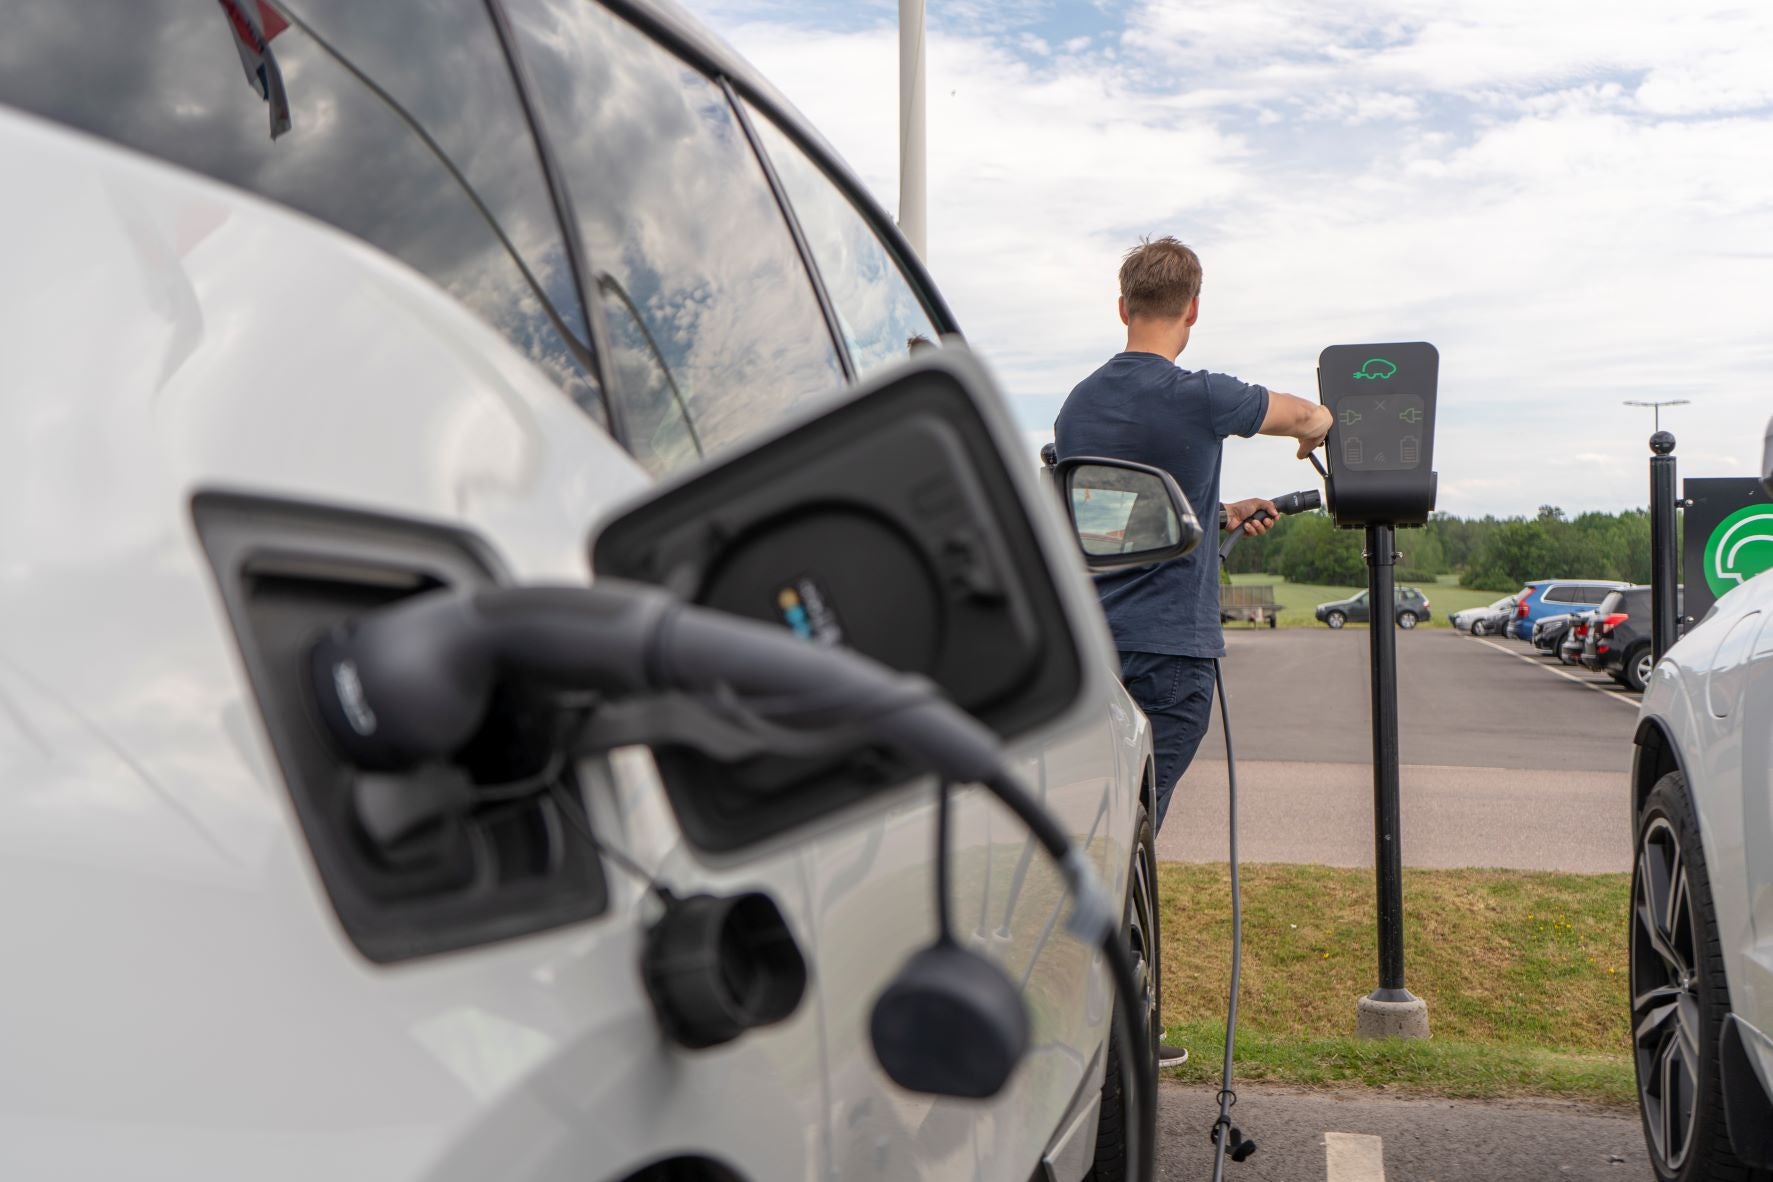 The demand for public EV charging stations is rising